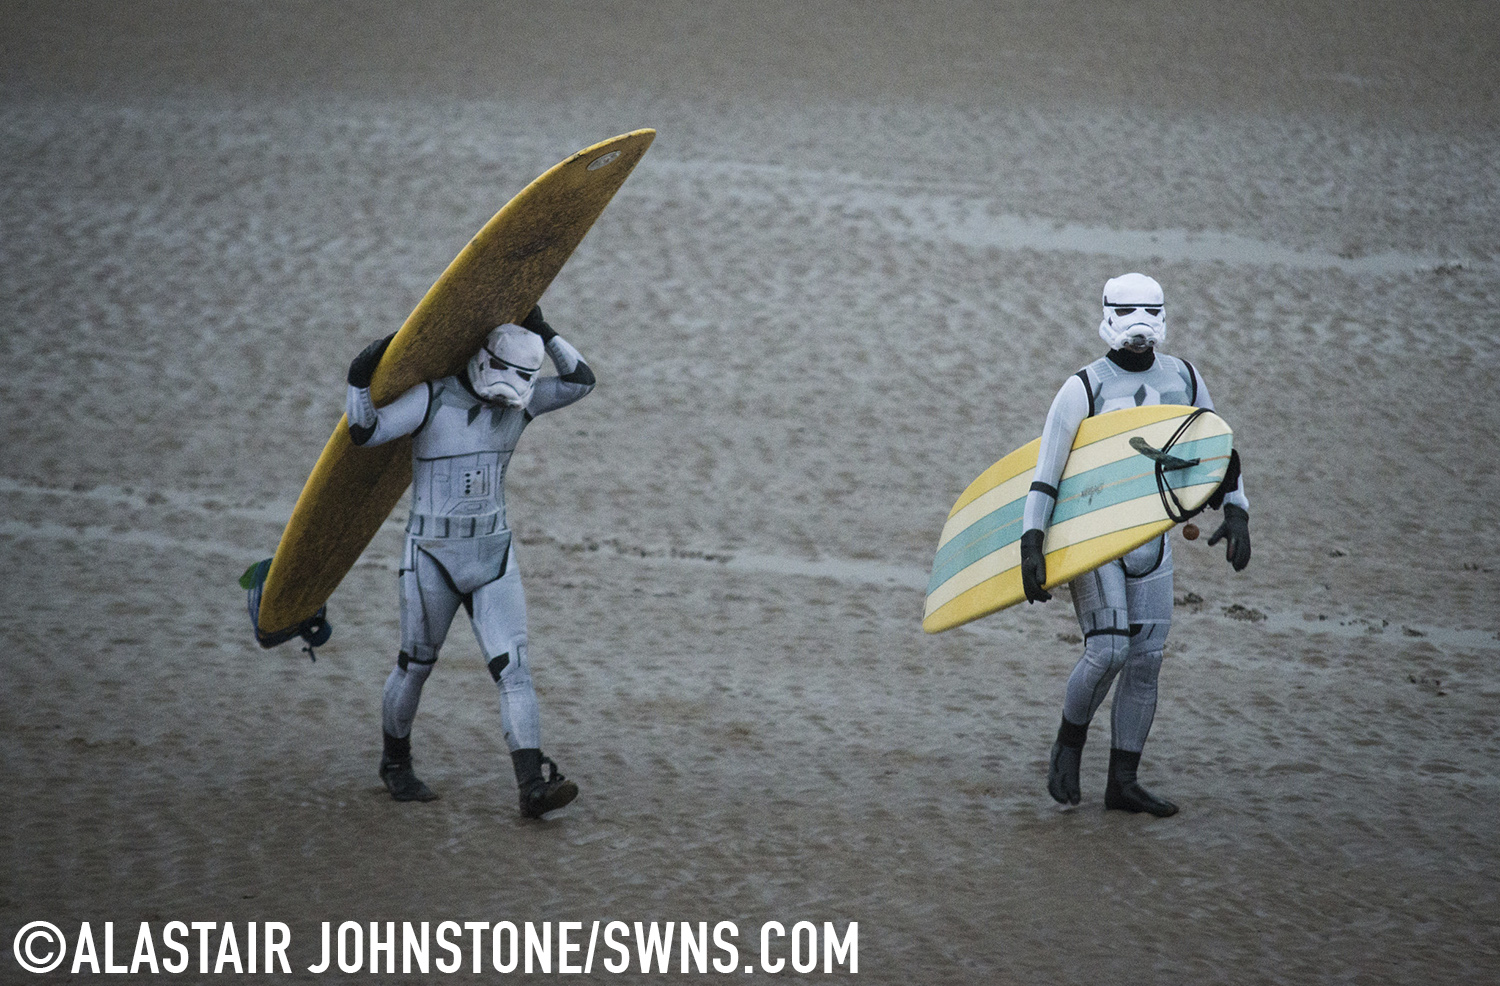 Surfers dressed as a Star Wars Stormtroopers wait for the Severn Bore on the River Severn in Gloucestershire, England. November 27 2015.  See SWNS story SWTROOPER: There was an unworldly sight in the Forest of Dean this morning (Friday 27th November) when a trio of Star Wars Stormtroopers surfed the spectacular Severn Bore. Key scenes from the upcoming Star Wars episode VII were filmed in nearby Puzzlewood and can be seen several times in the trailer.  Swapping the Death Star for surfboards, the elite soldiers of the Galactic Empire took to the waves to mark the release of the highly anticipated new Star Wars film and a new TV & Movie Trail. The Forest of Dean’s atmospheric and picturesque location provided a natural stage for the film, which director J.J Abrams referenced in a thank you letter to all of the movie's cast and crew.